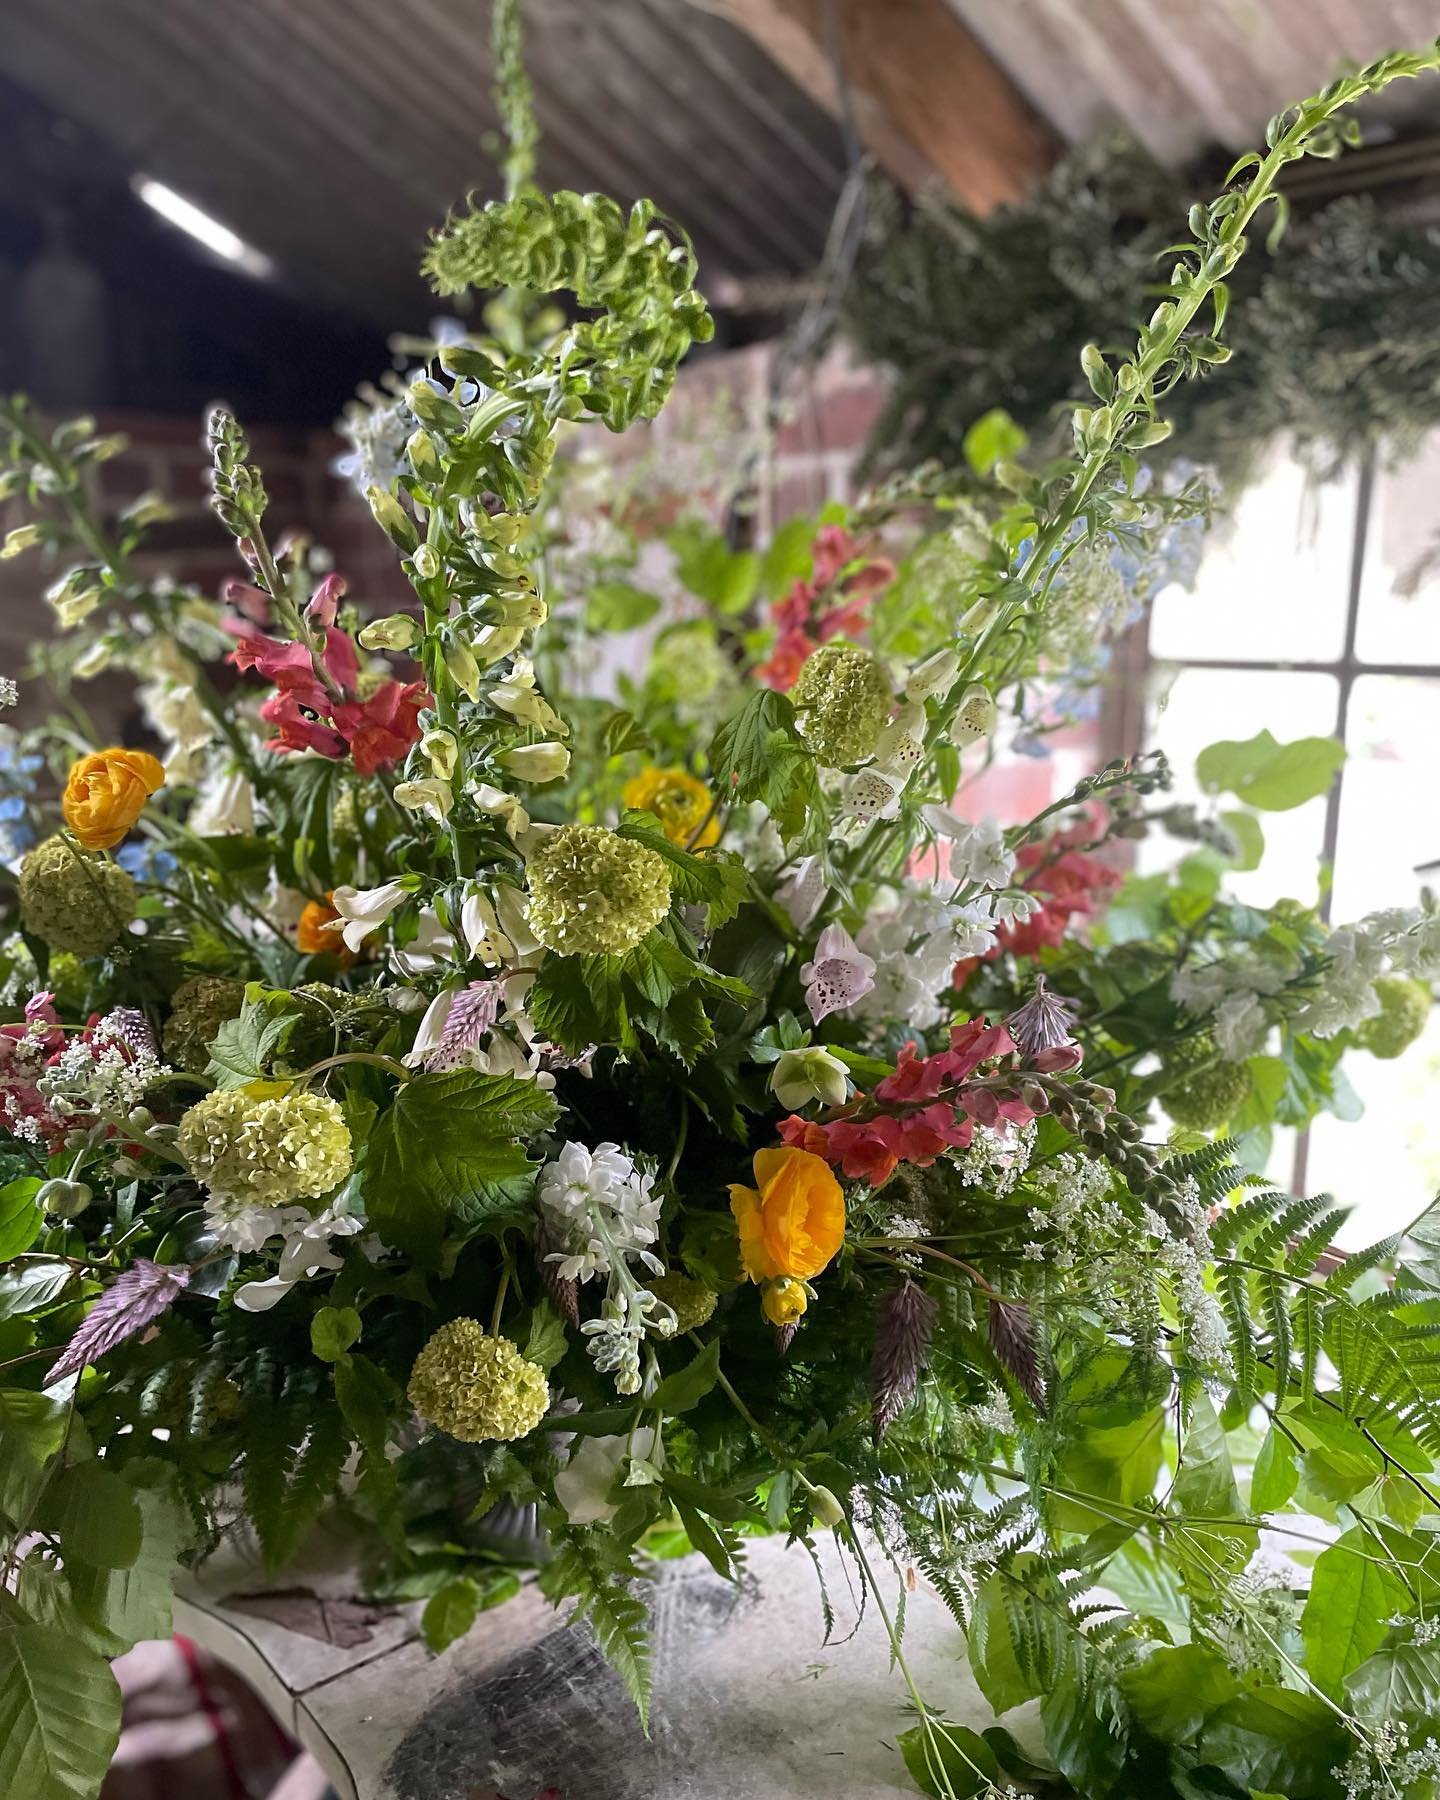 Back in the workshop getting ready for this week&rsquo;s wedding @twowoodsestate tomorrow and then creating flowers in the beautiful village of Wisborough Green, West Sussex at the weekend. Lots of cuttings from home today @wiildwillowatmyrtecottage 